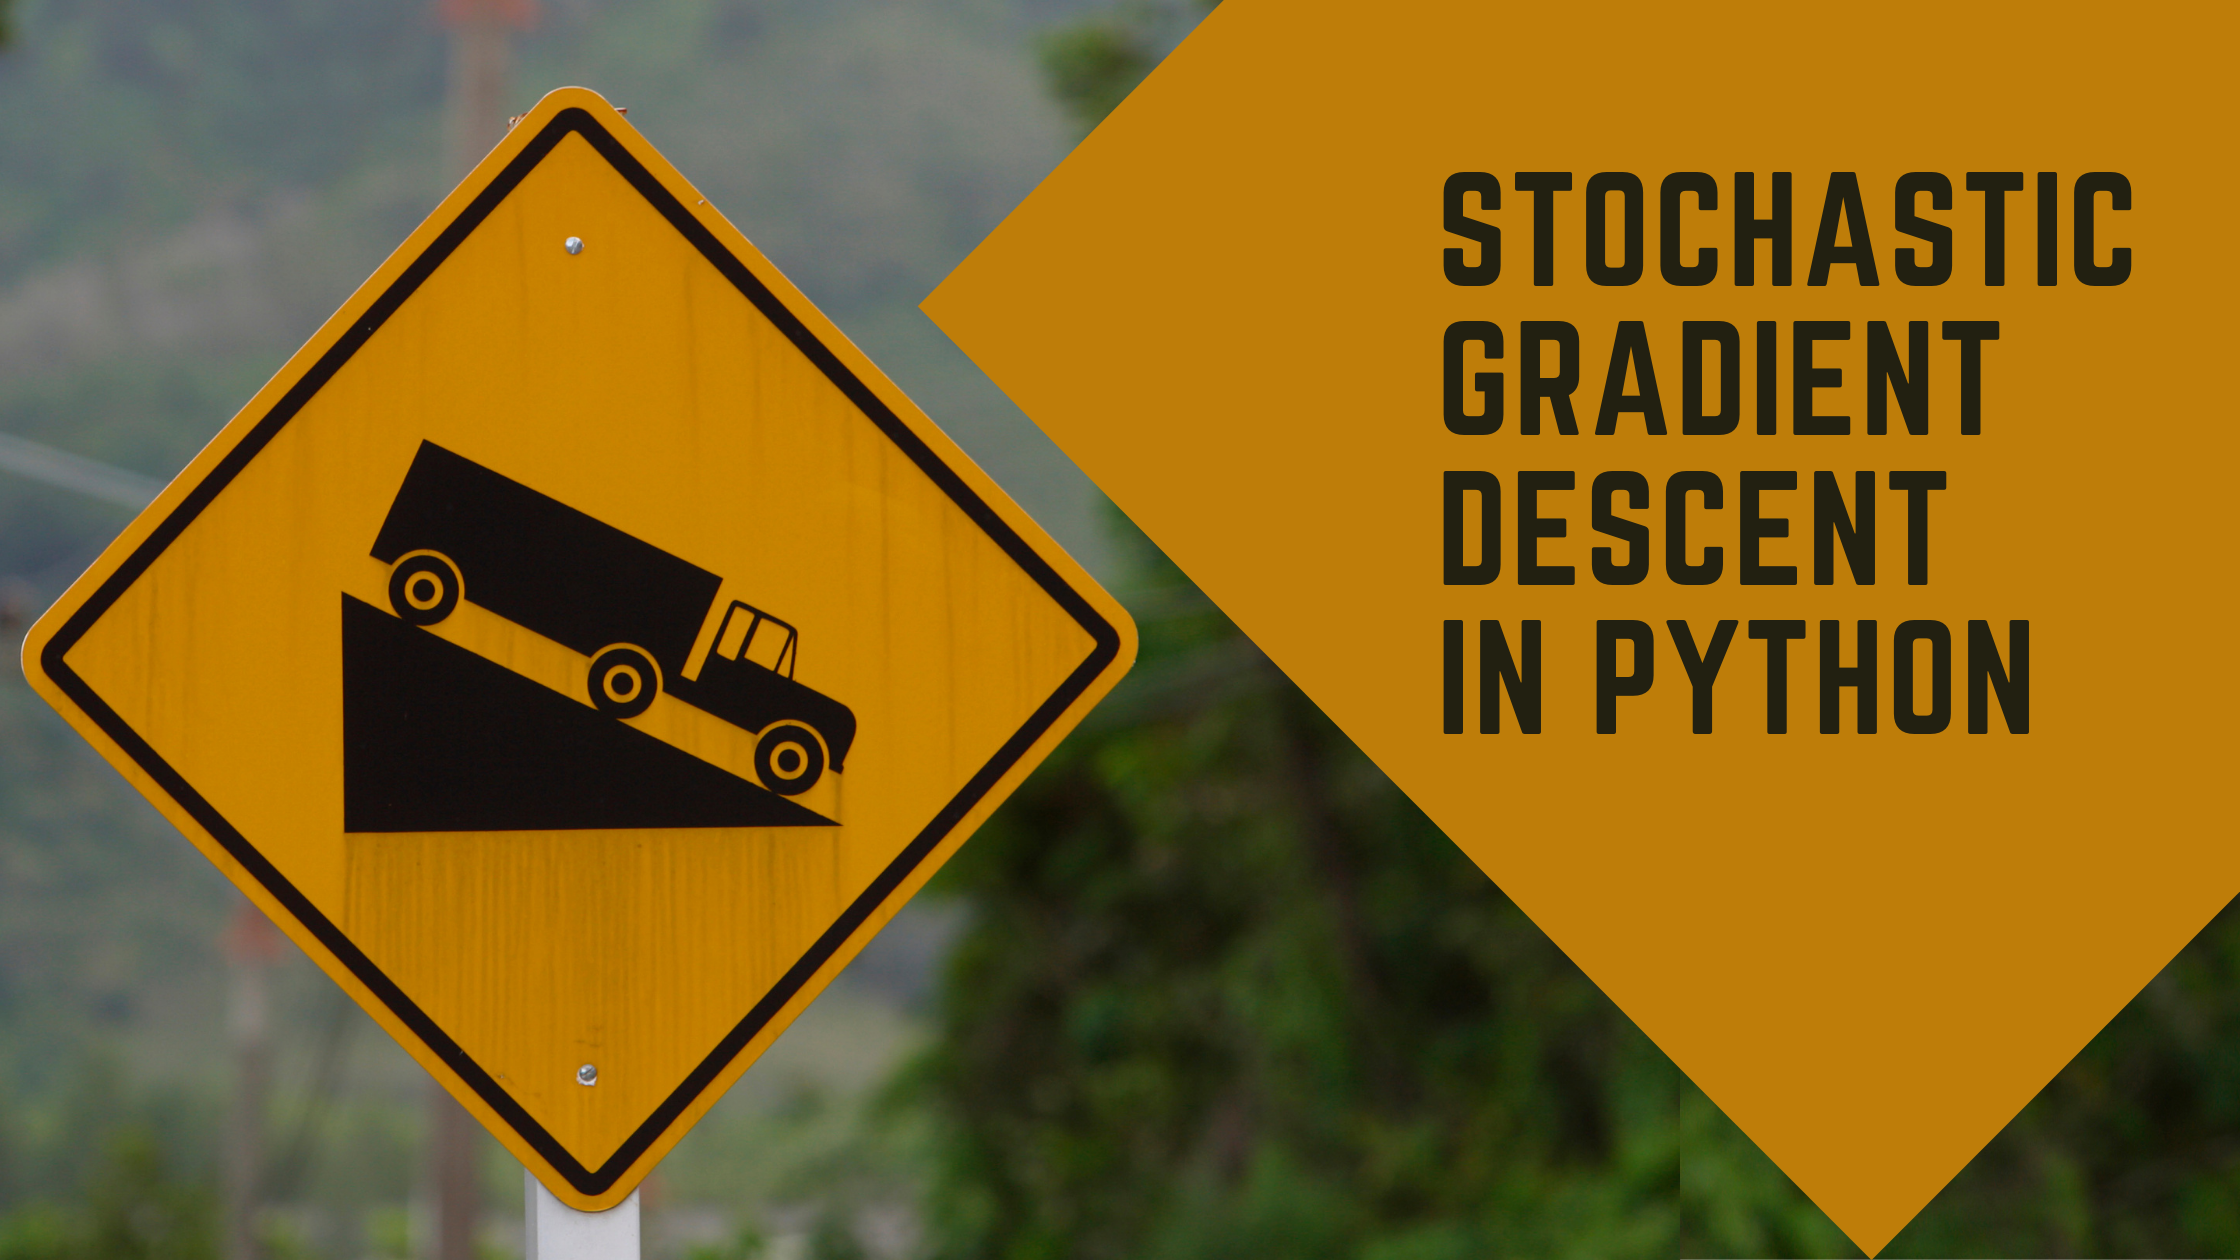 Stochastic gradient descent in python with road sign